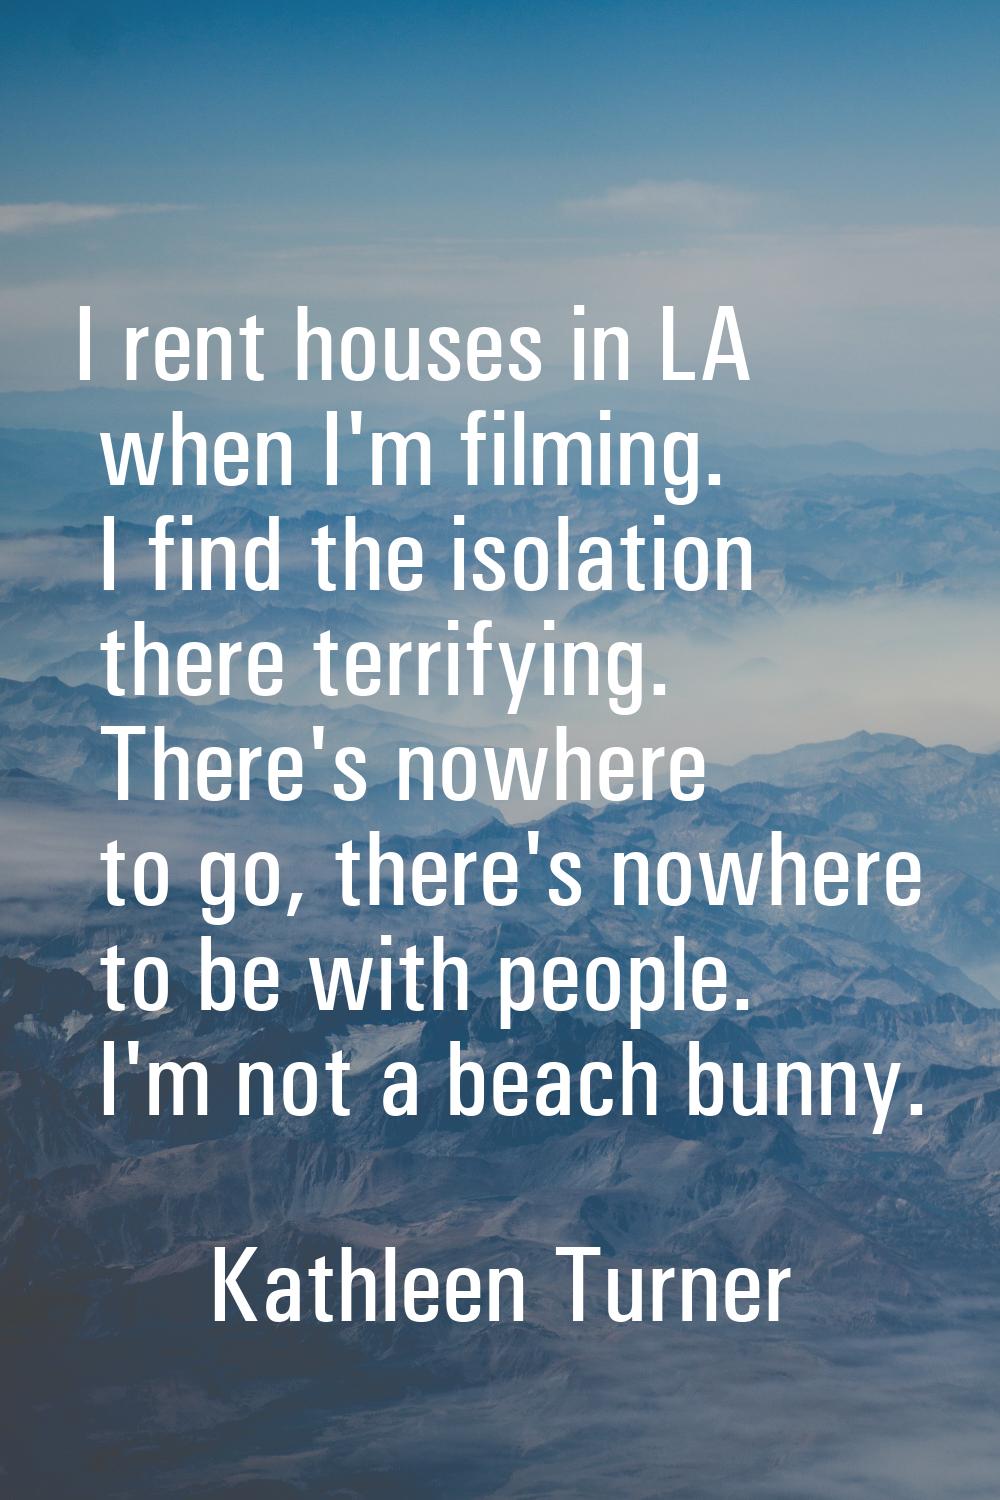 I rent houses in LA when I'm filming. I find the isolation there terrifying. There's nowhere to go,